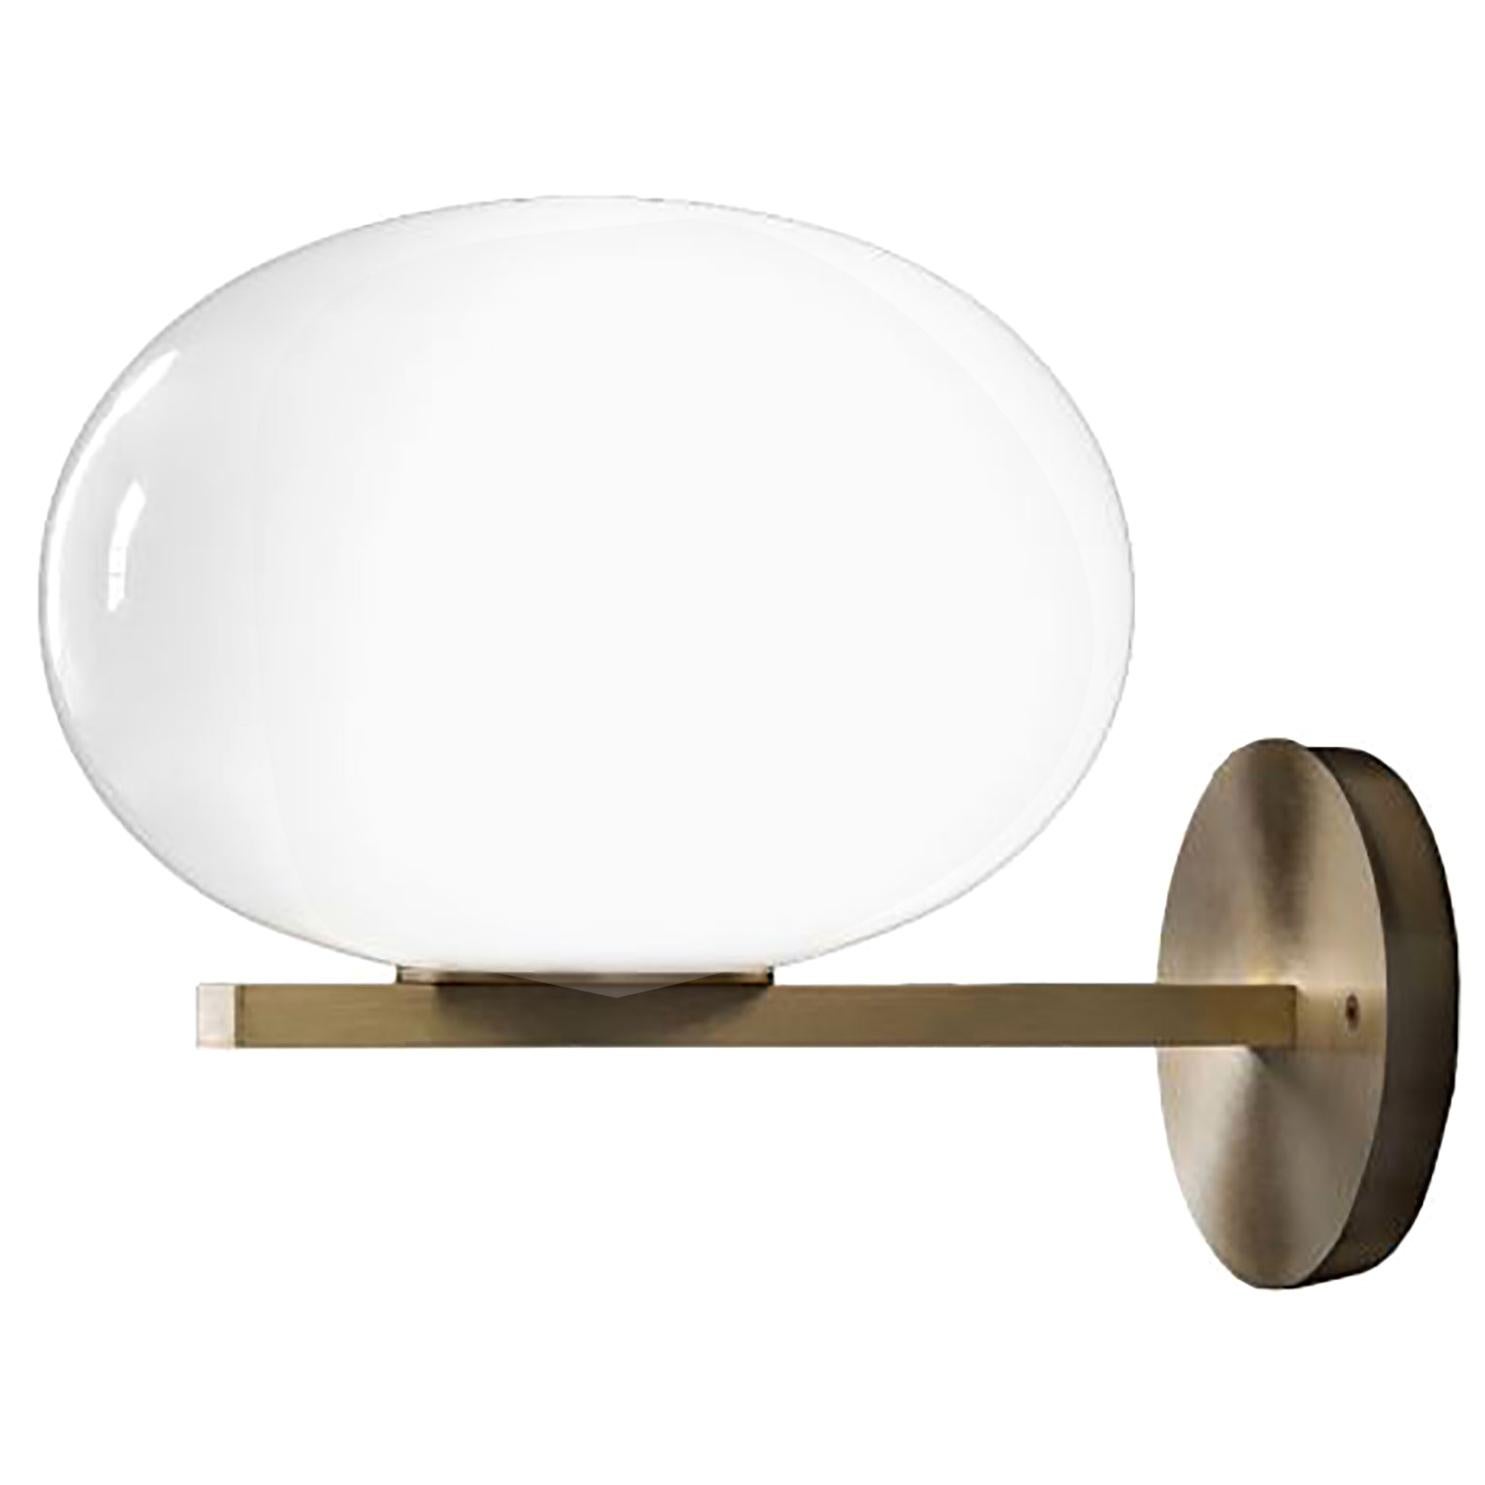 Alba Wall/Ceiling Lamp by Mariana Pellegrino Soto for Oluce